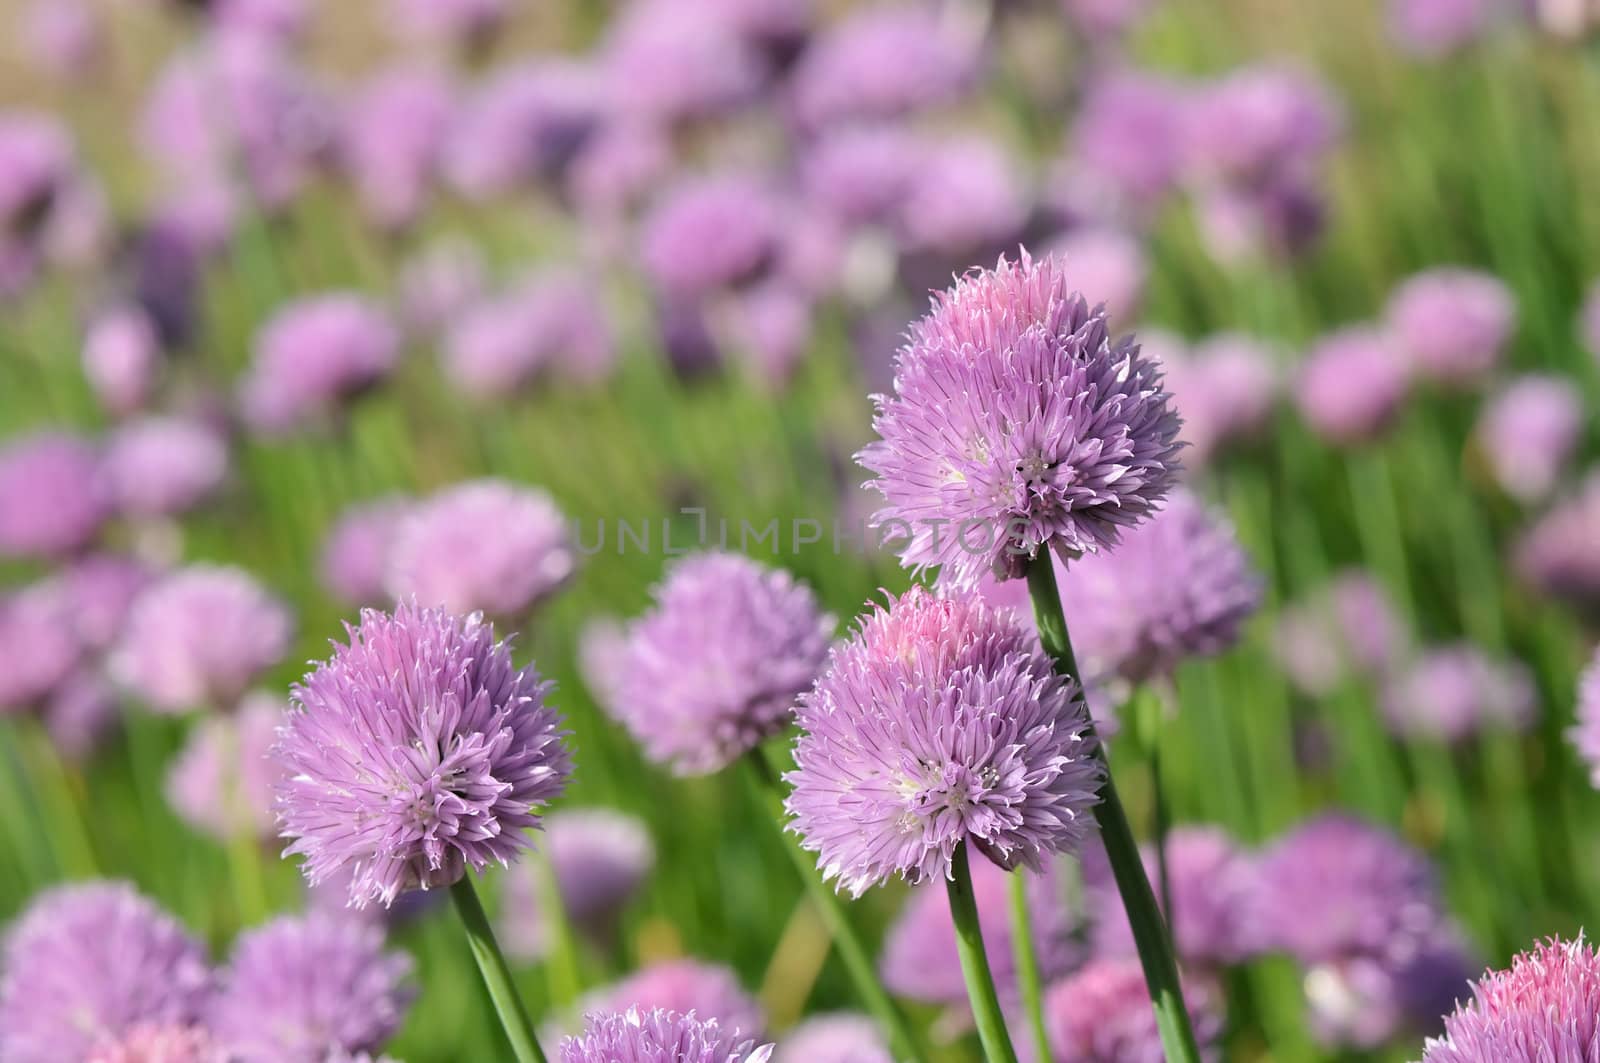 Chive flowers in the garden on a sunny day